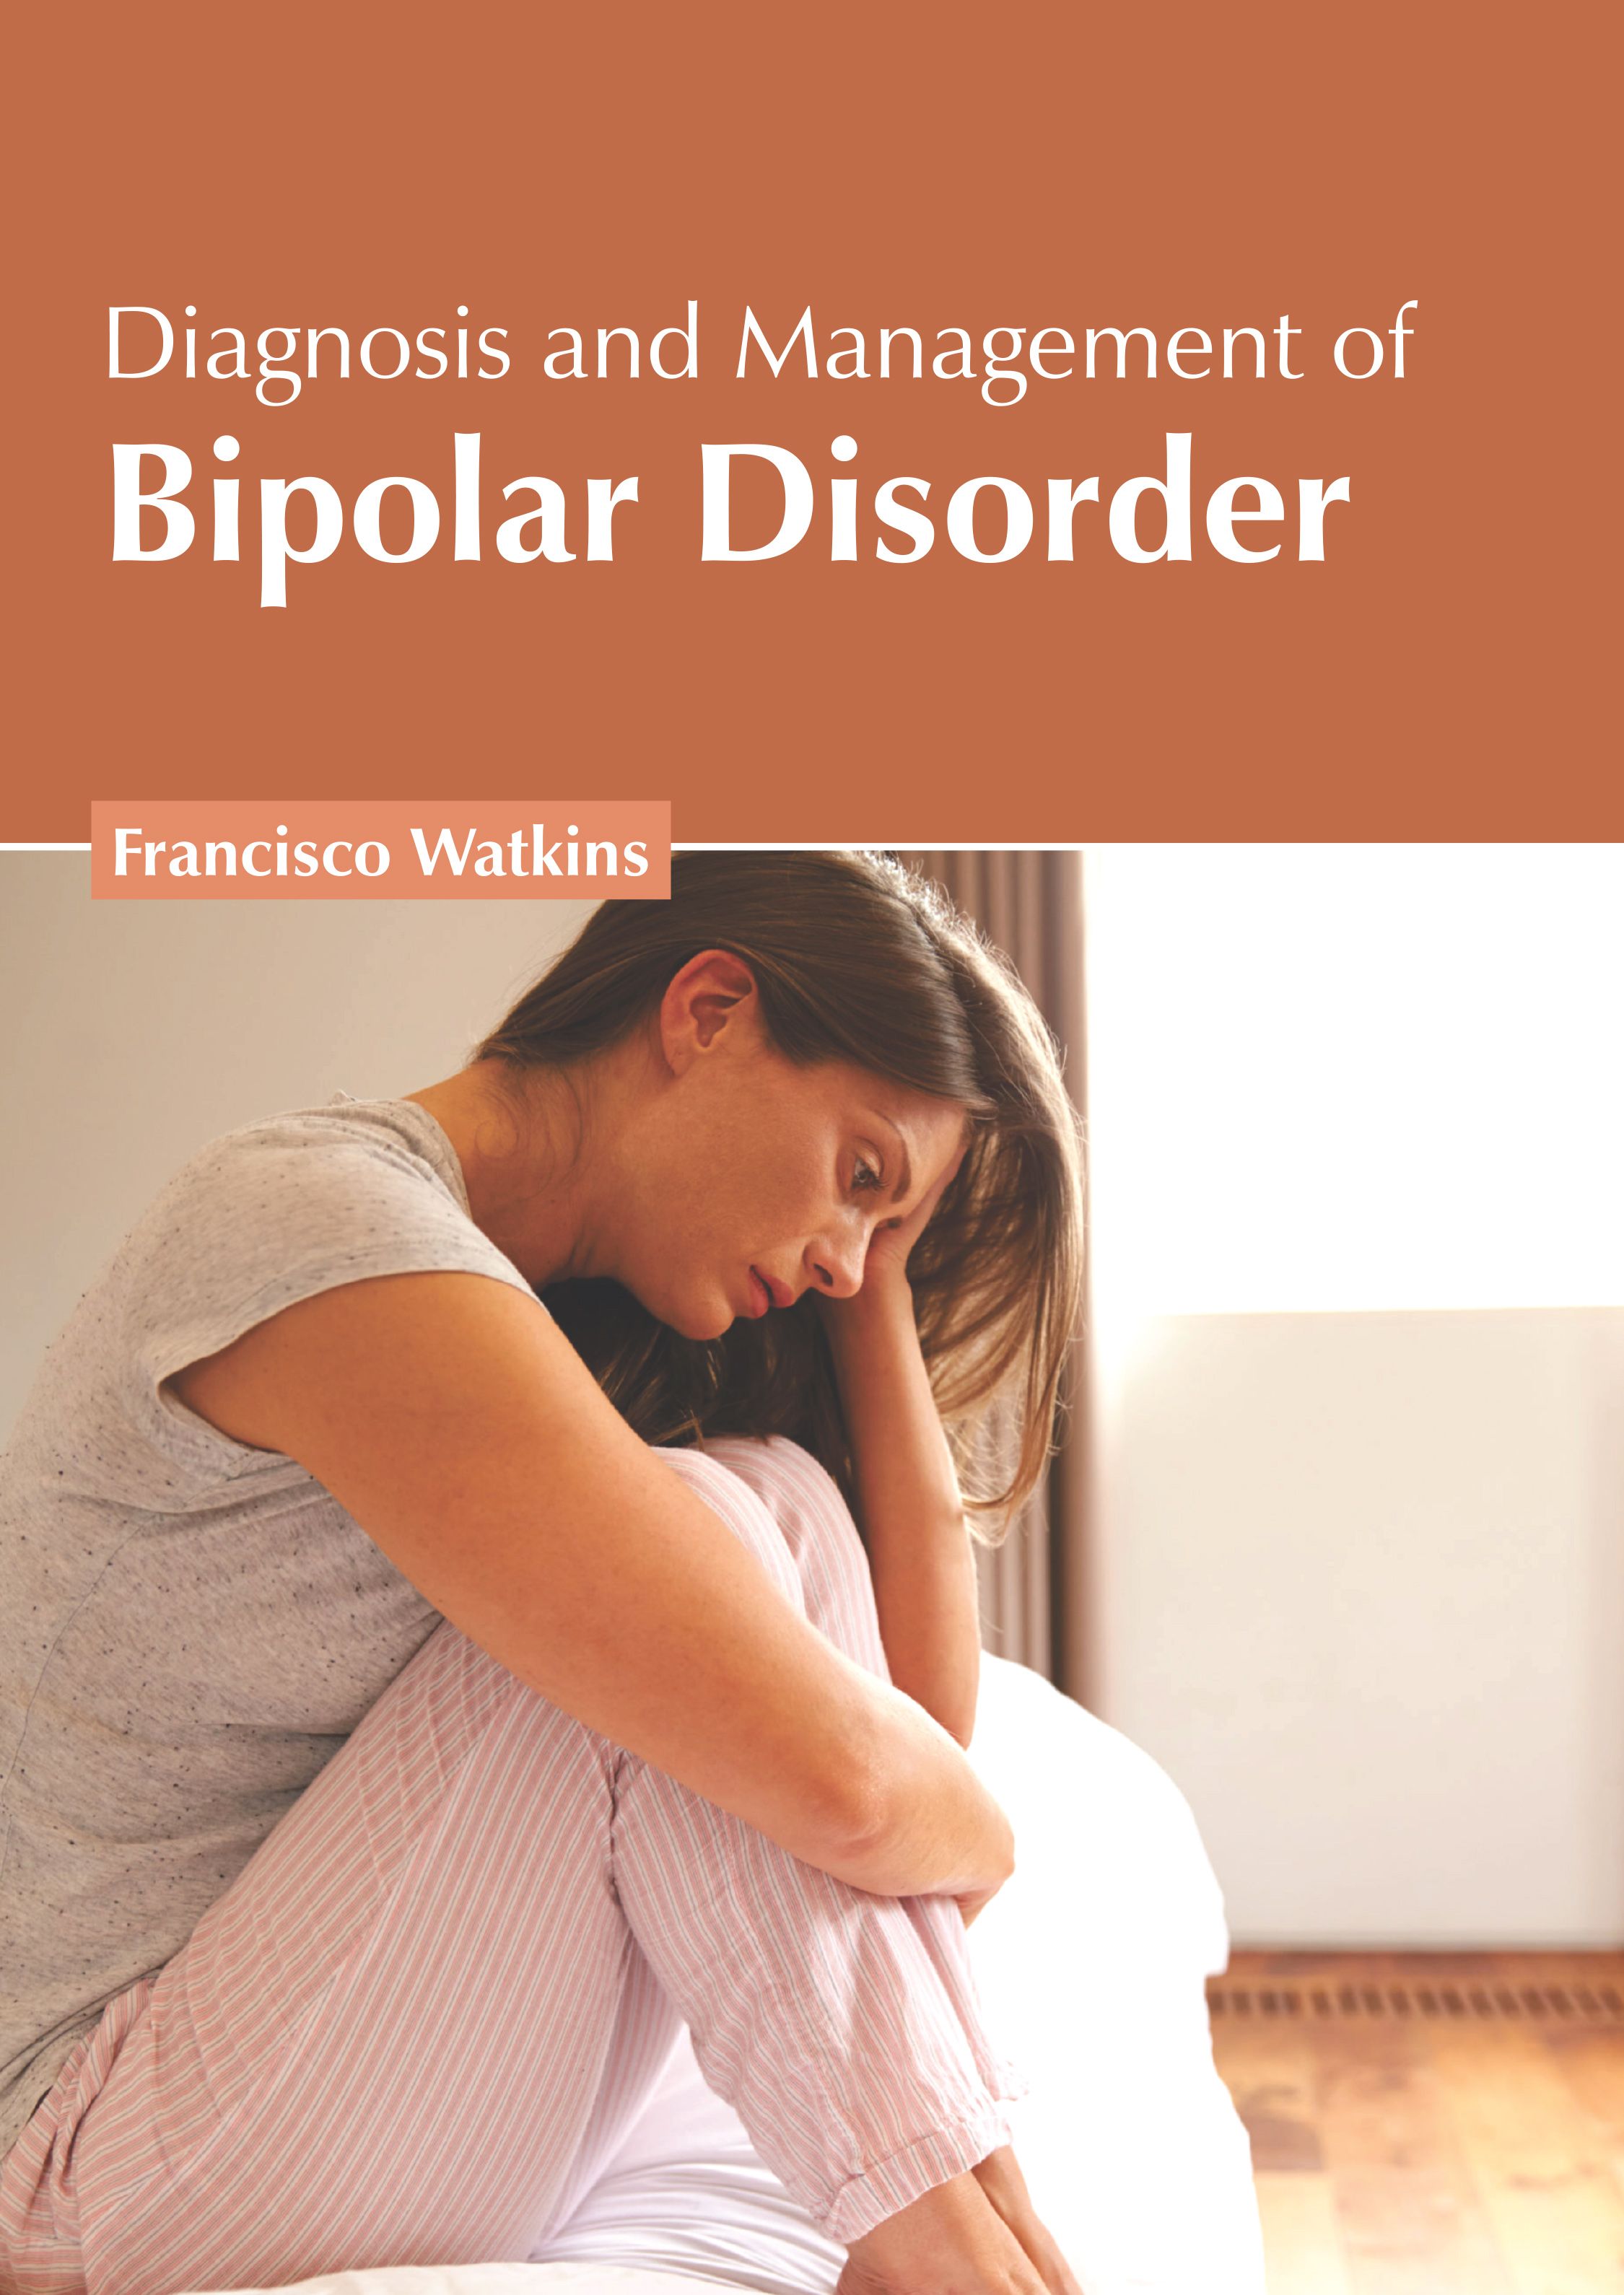 DIAGNOSIS AND MANAGEMENT OF BIPOLAR DISORDER